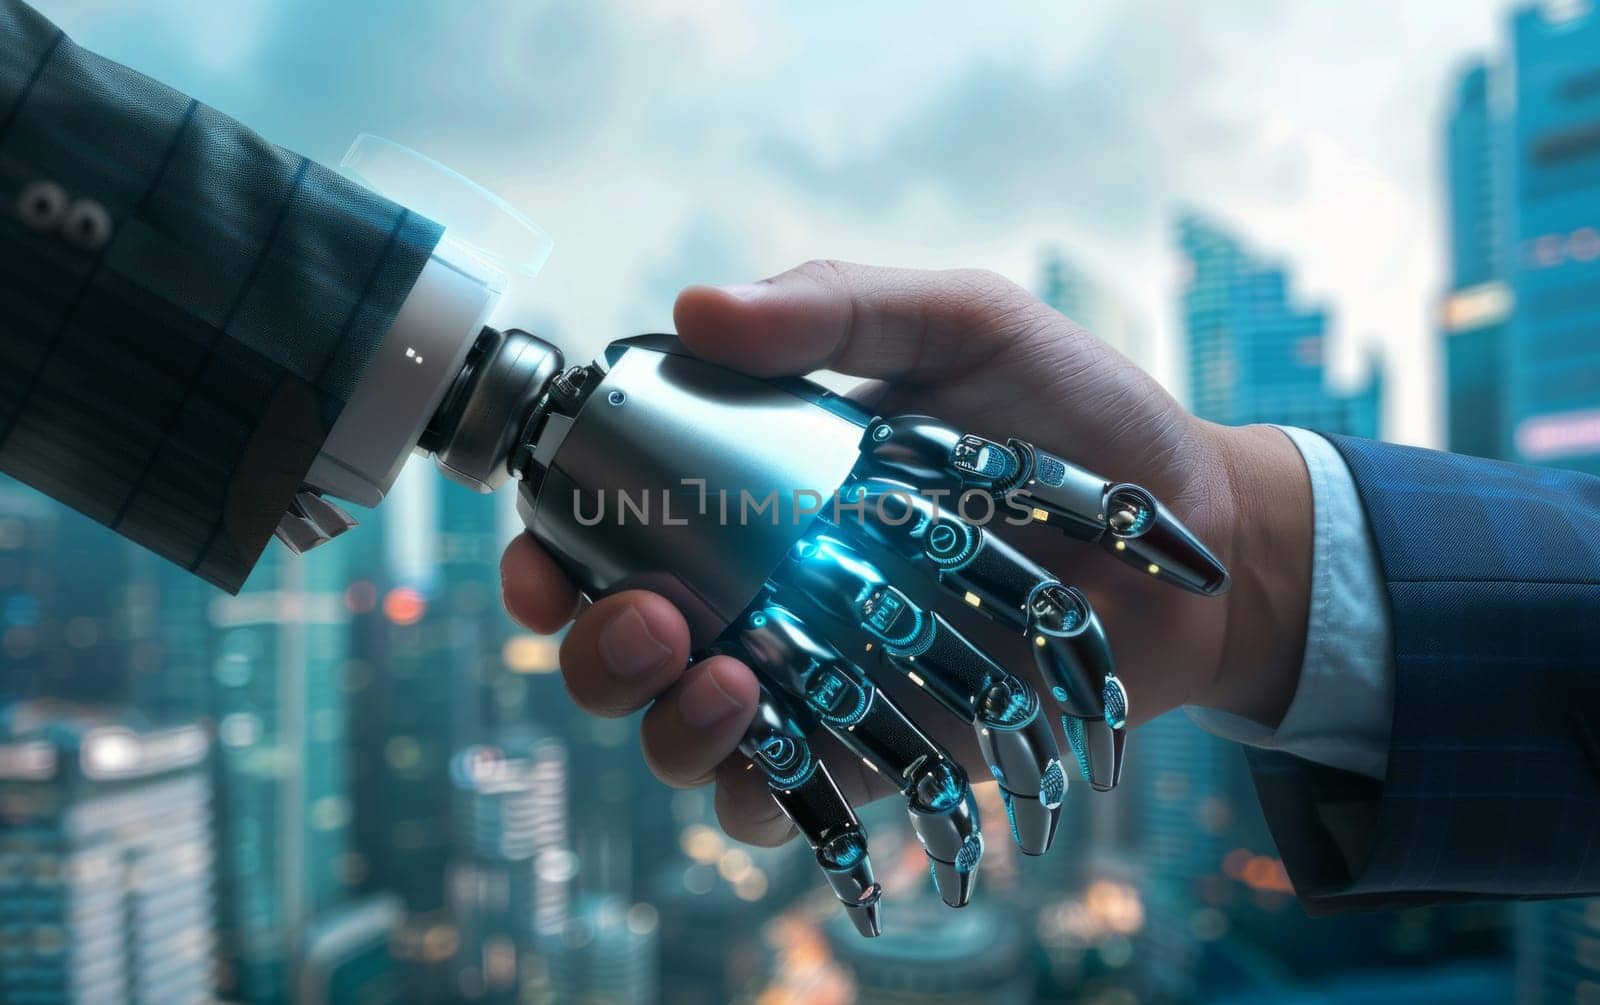 Business handshake between robot and human partners or friends with cityscape in the background.